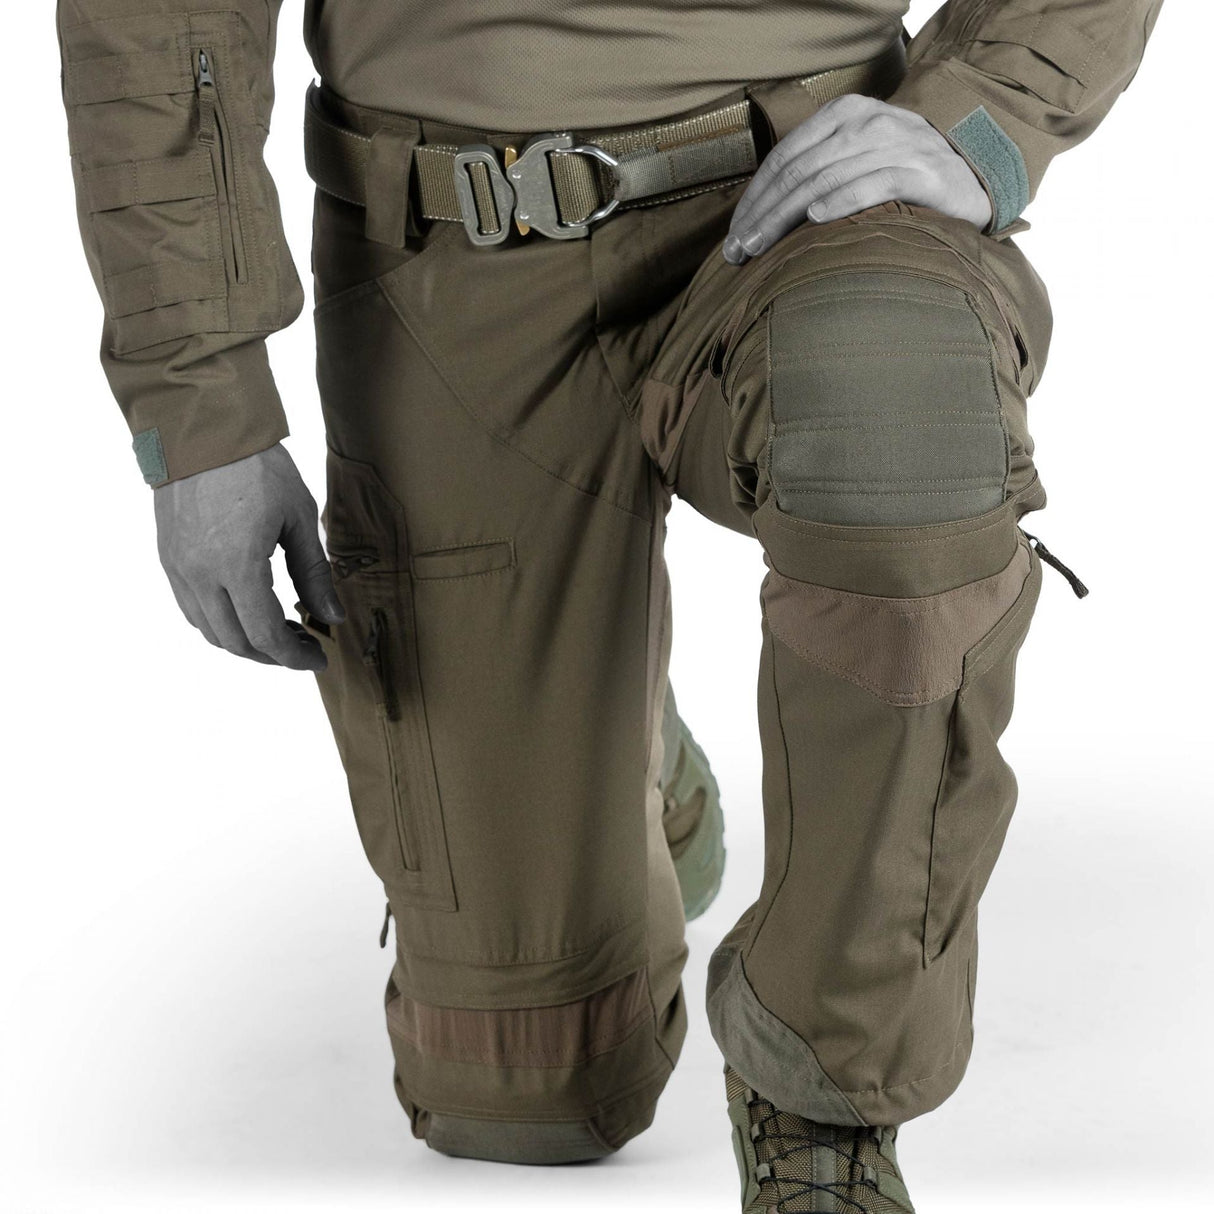 Tactical Gear: Functional pockets, durable fabric, suitable for first responders.